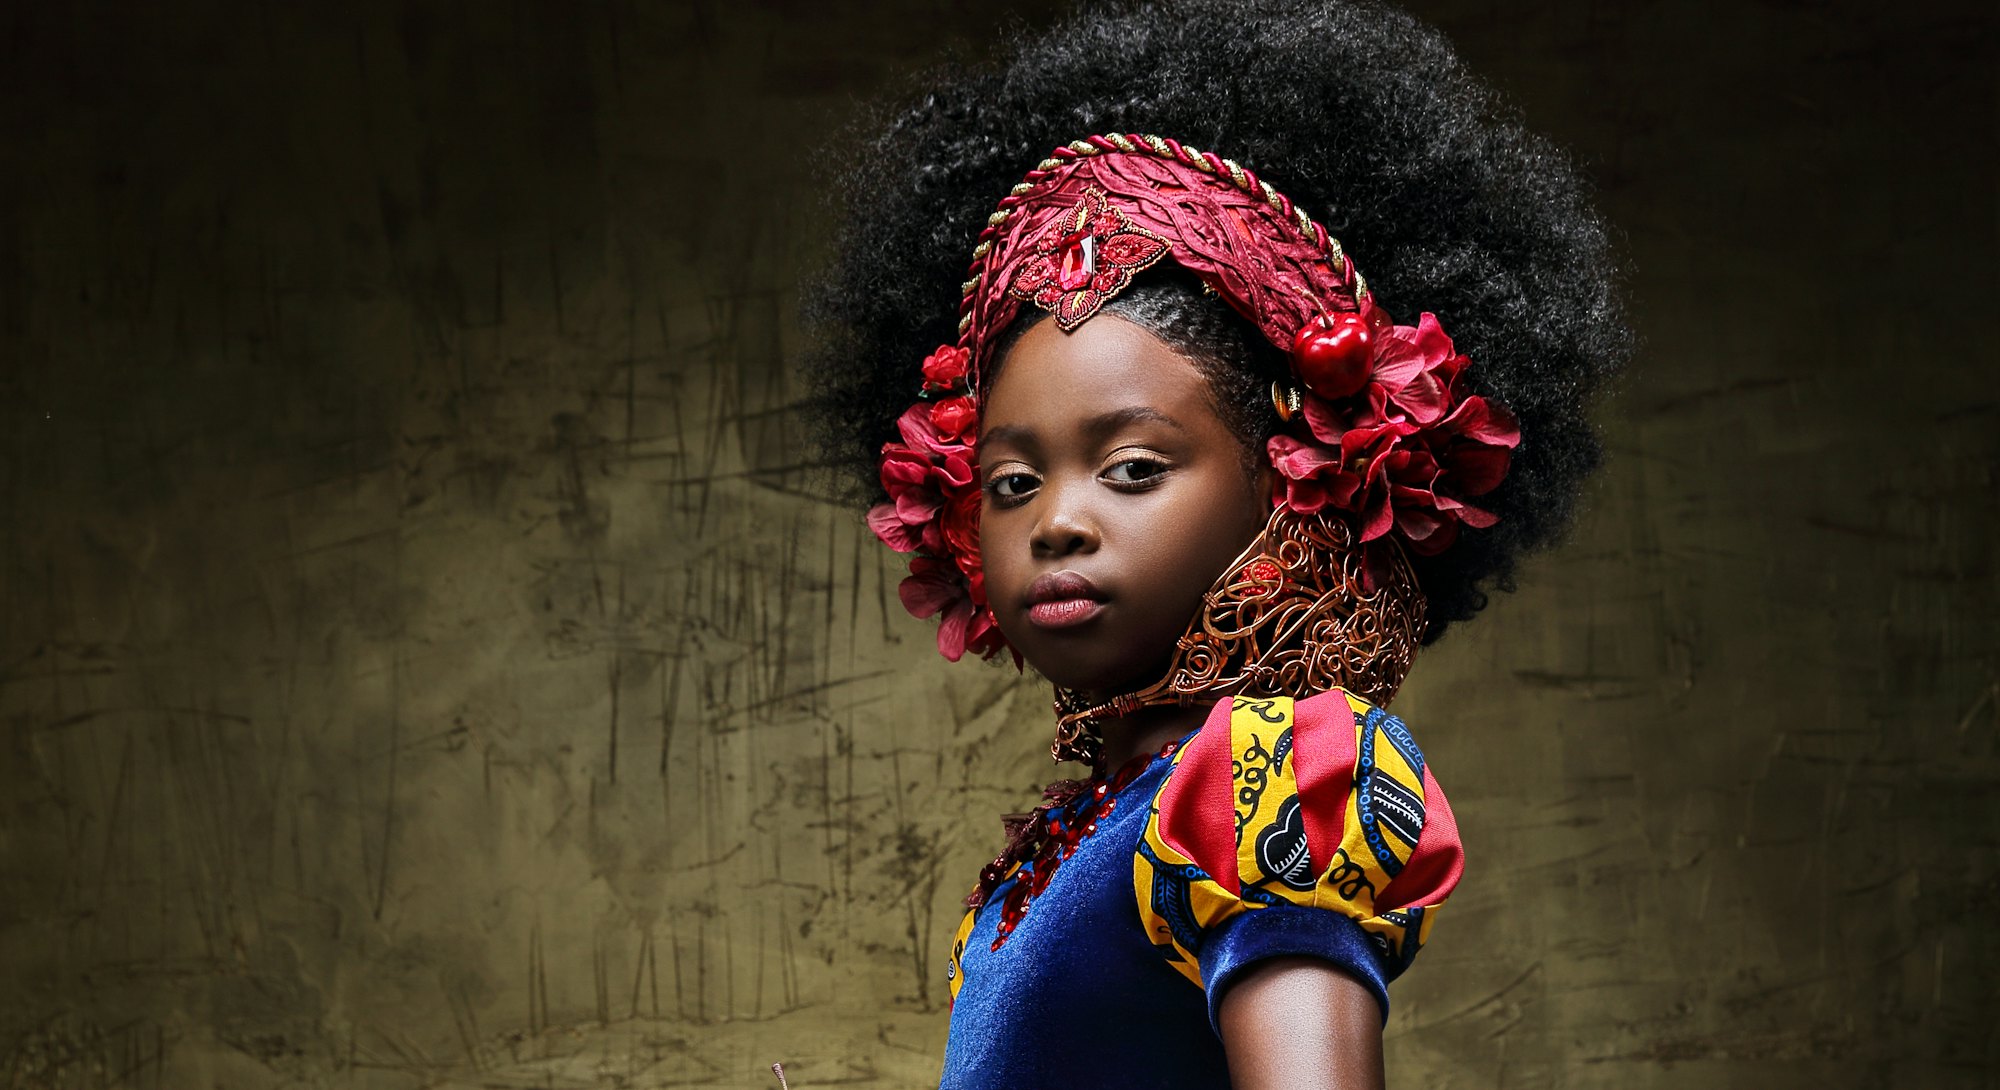 An African-American Princess themed photo series from LaChanda Gatson celebrates beauty and diversit...